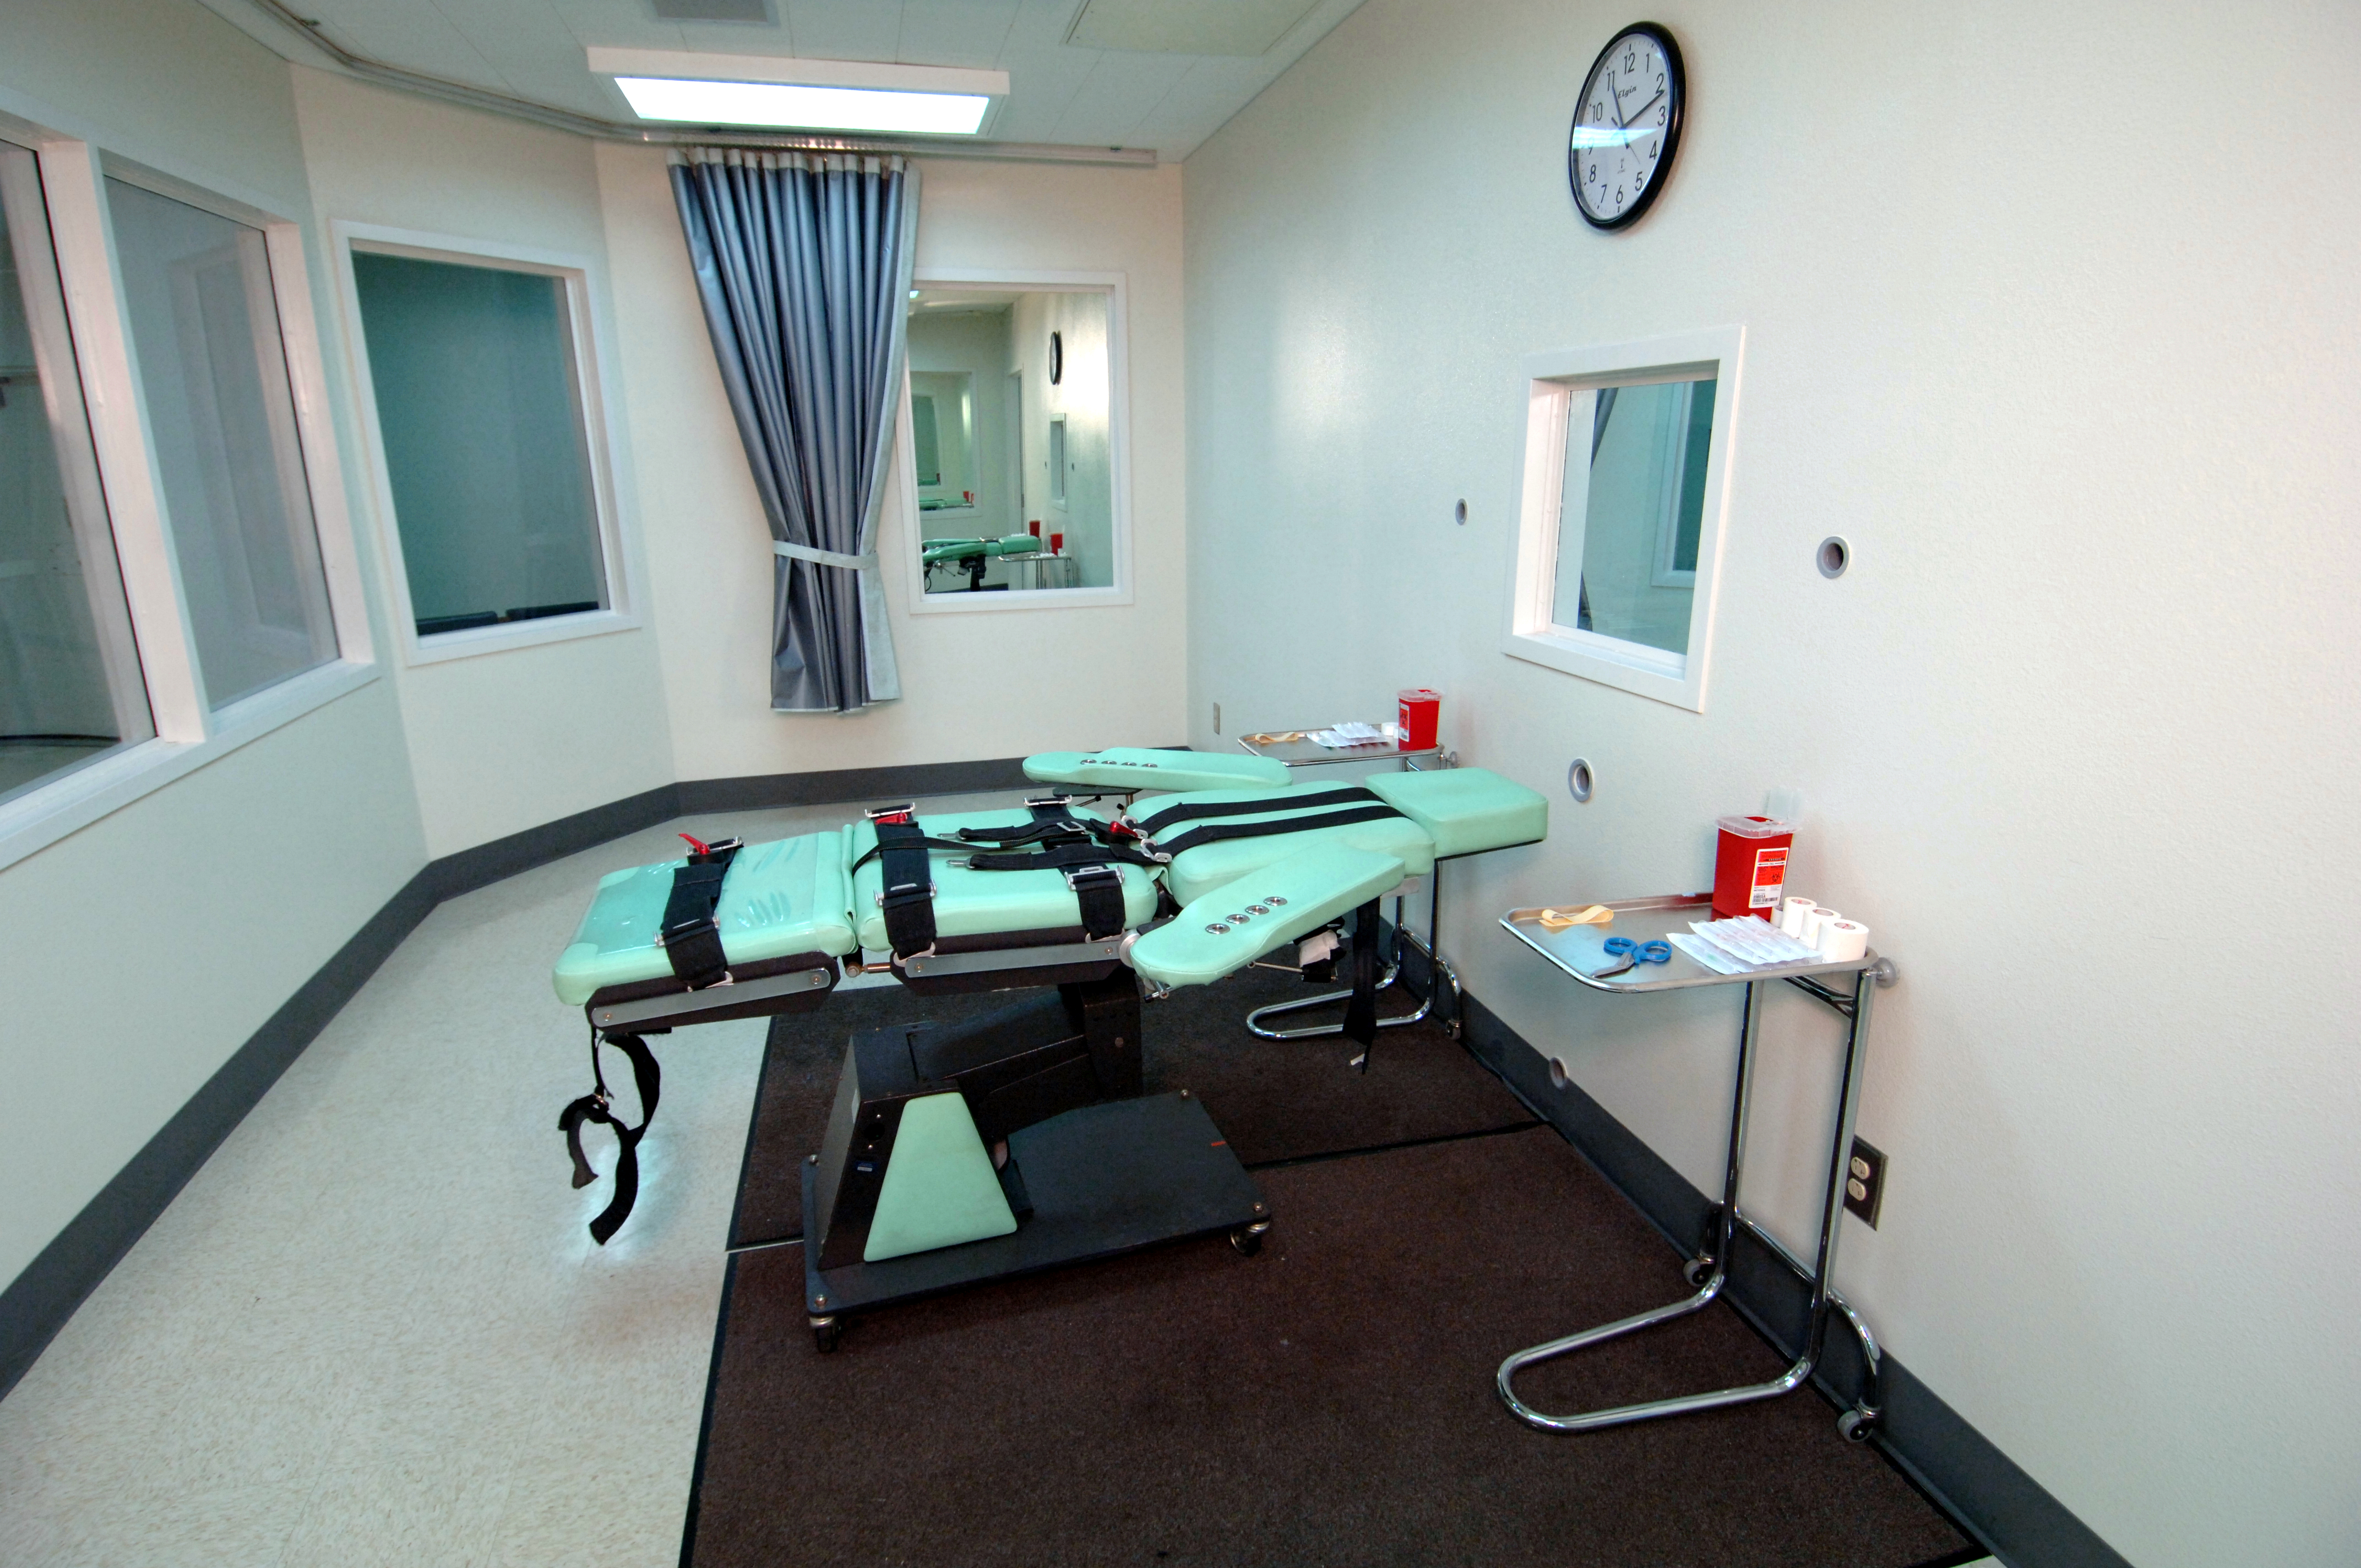 US Supreme Court holds death row inmates can challenge their method of execution